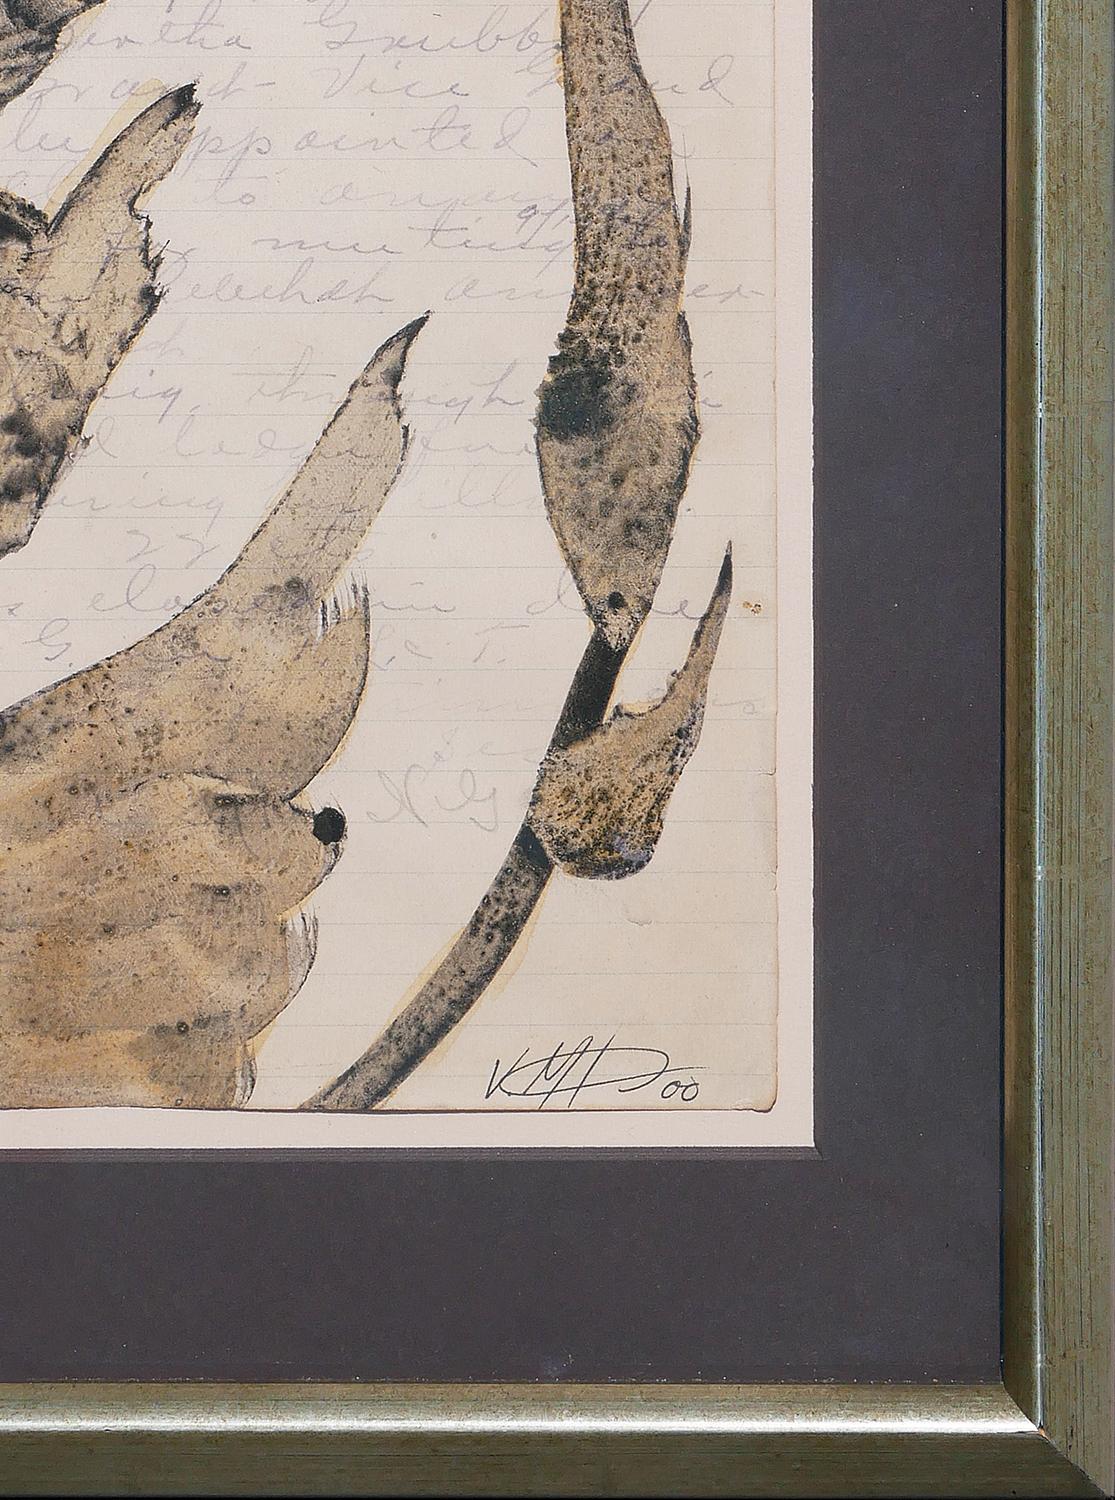 Monochromatic abstract work on paper by Houston, TX artist Vergel Grotfeldt. This piece depicts a black figure of a swan and snail on leaves and tree branches. These figures are drawn on an old letter with signs of wear, purposefully chosen to